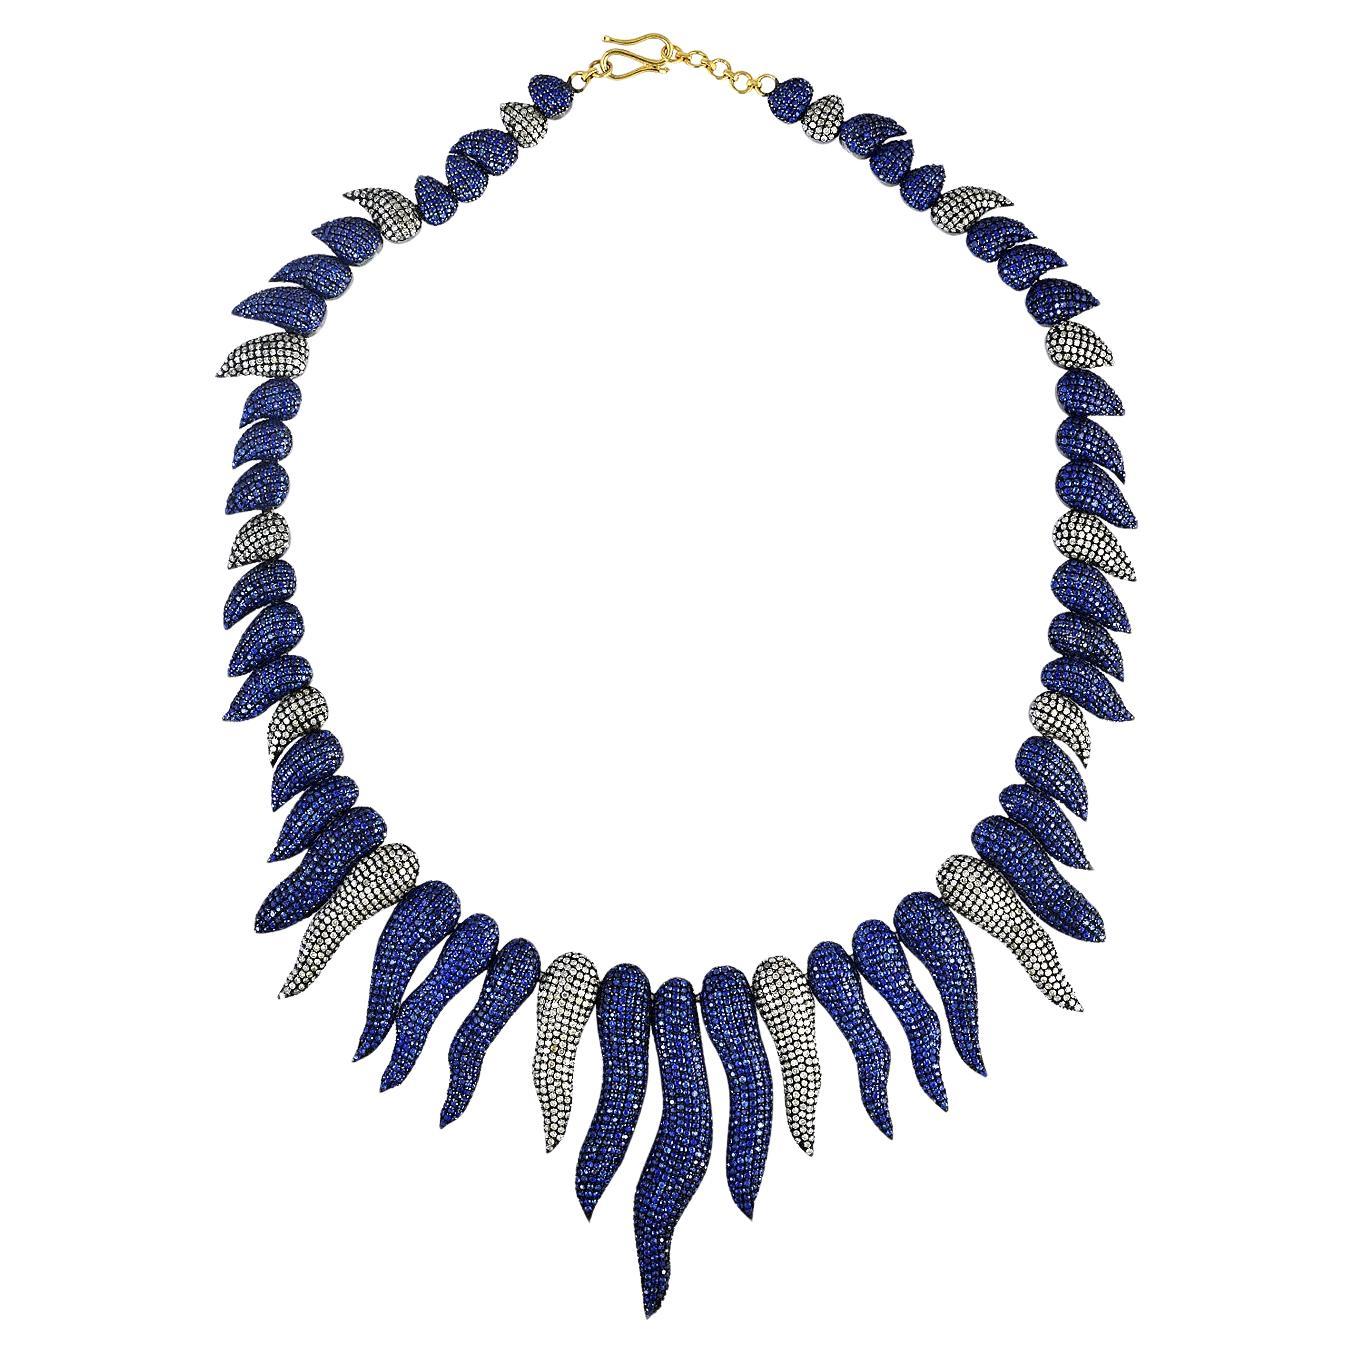 35.06 ct Pave Blue Sapphire & Pave Diamonds Tribal Style Necklace In 14k Gold For Sale